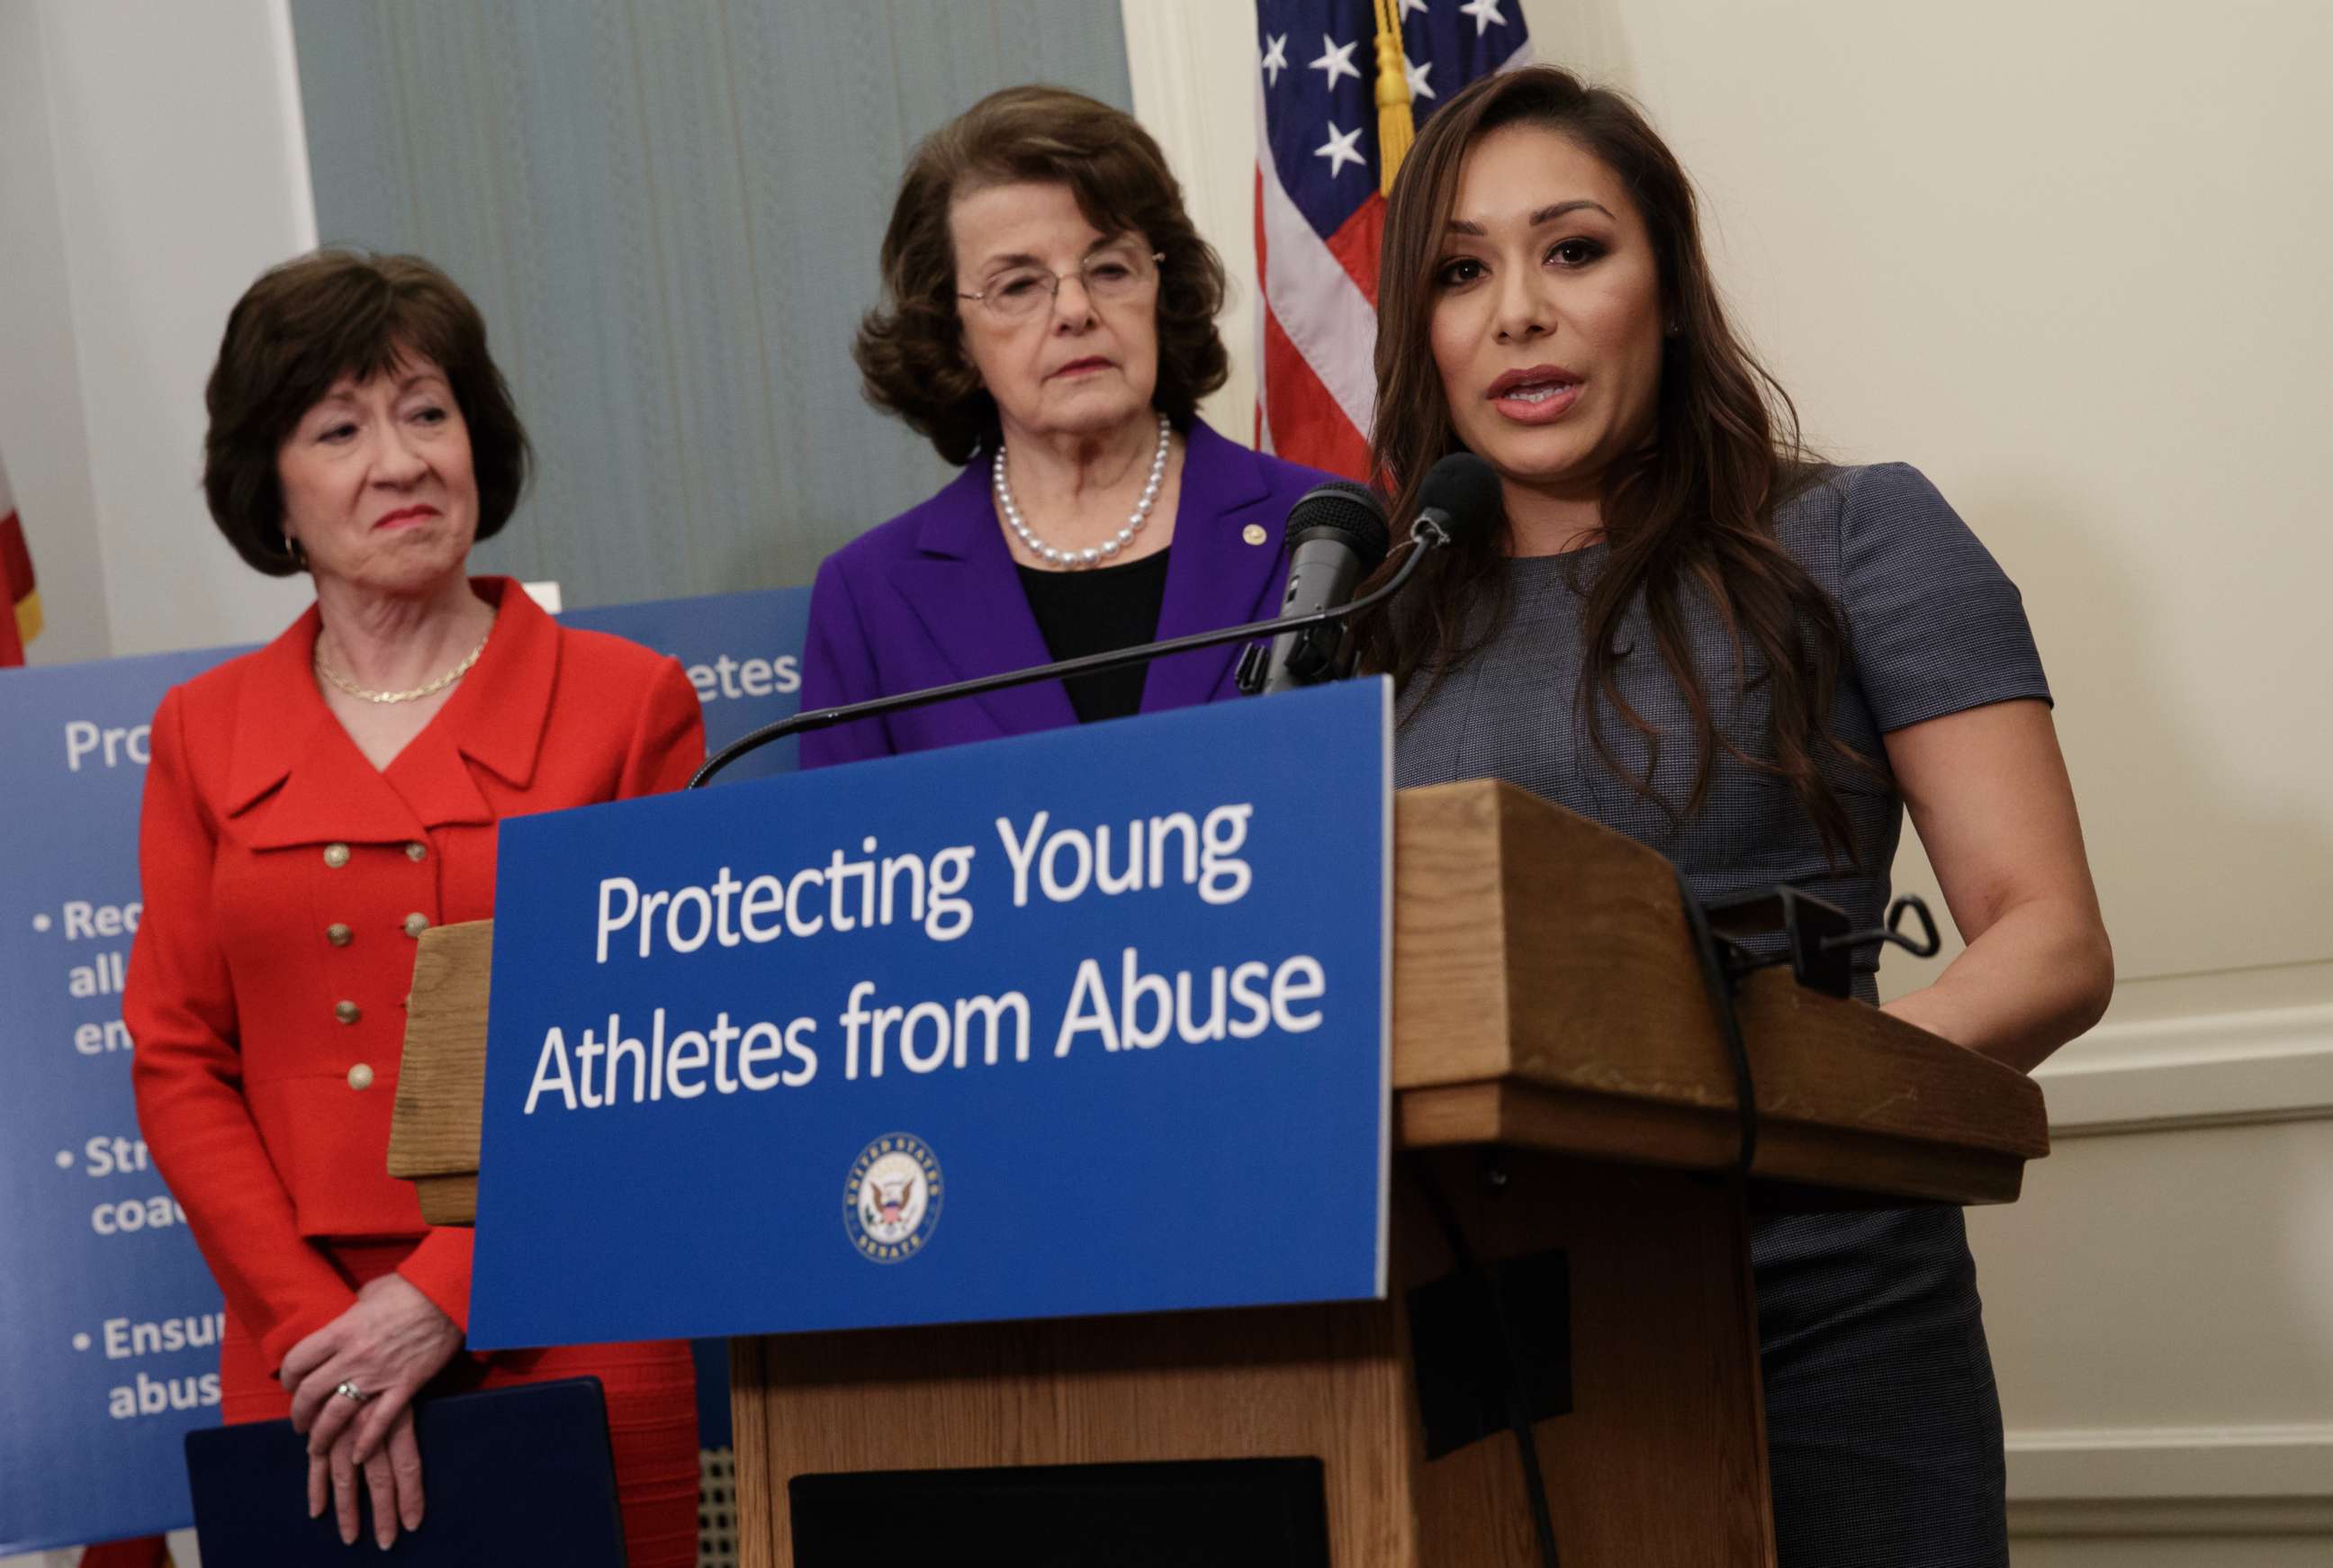 After Nassar, Congress moves to prevent sex abuse of athletes